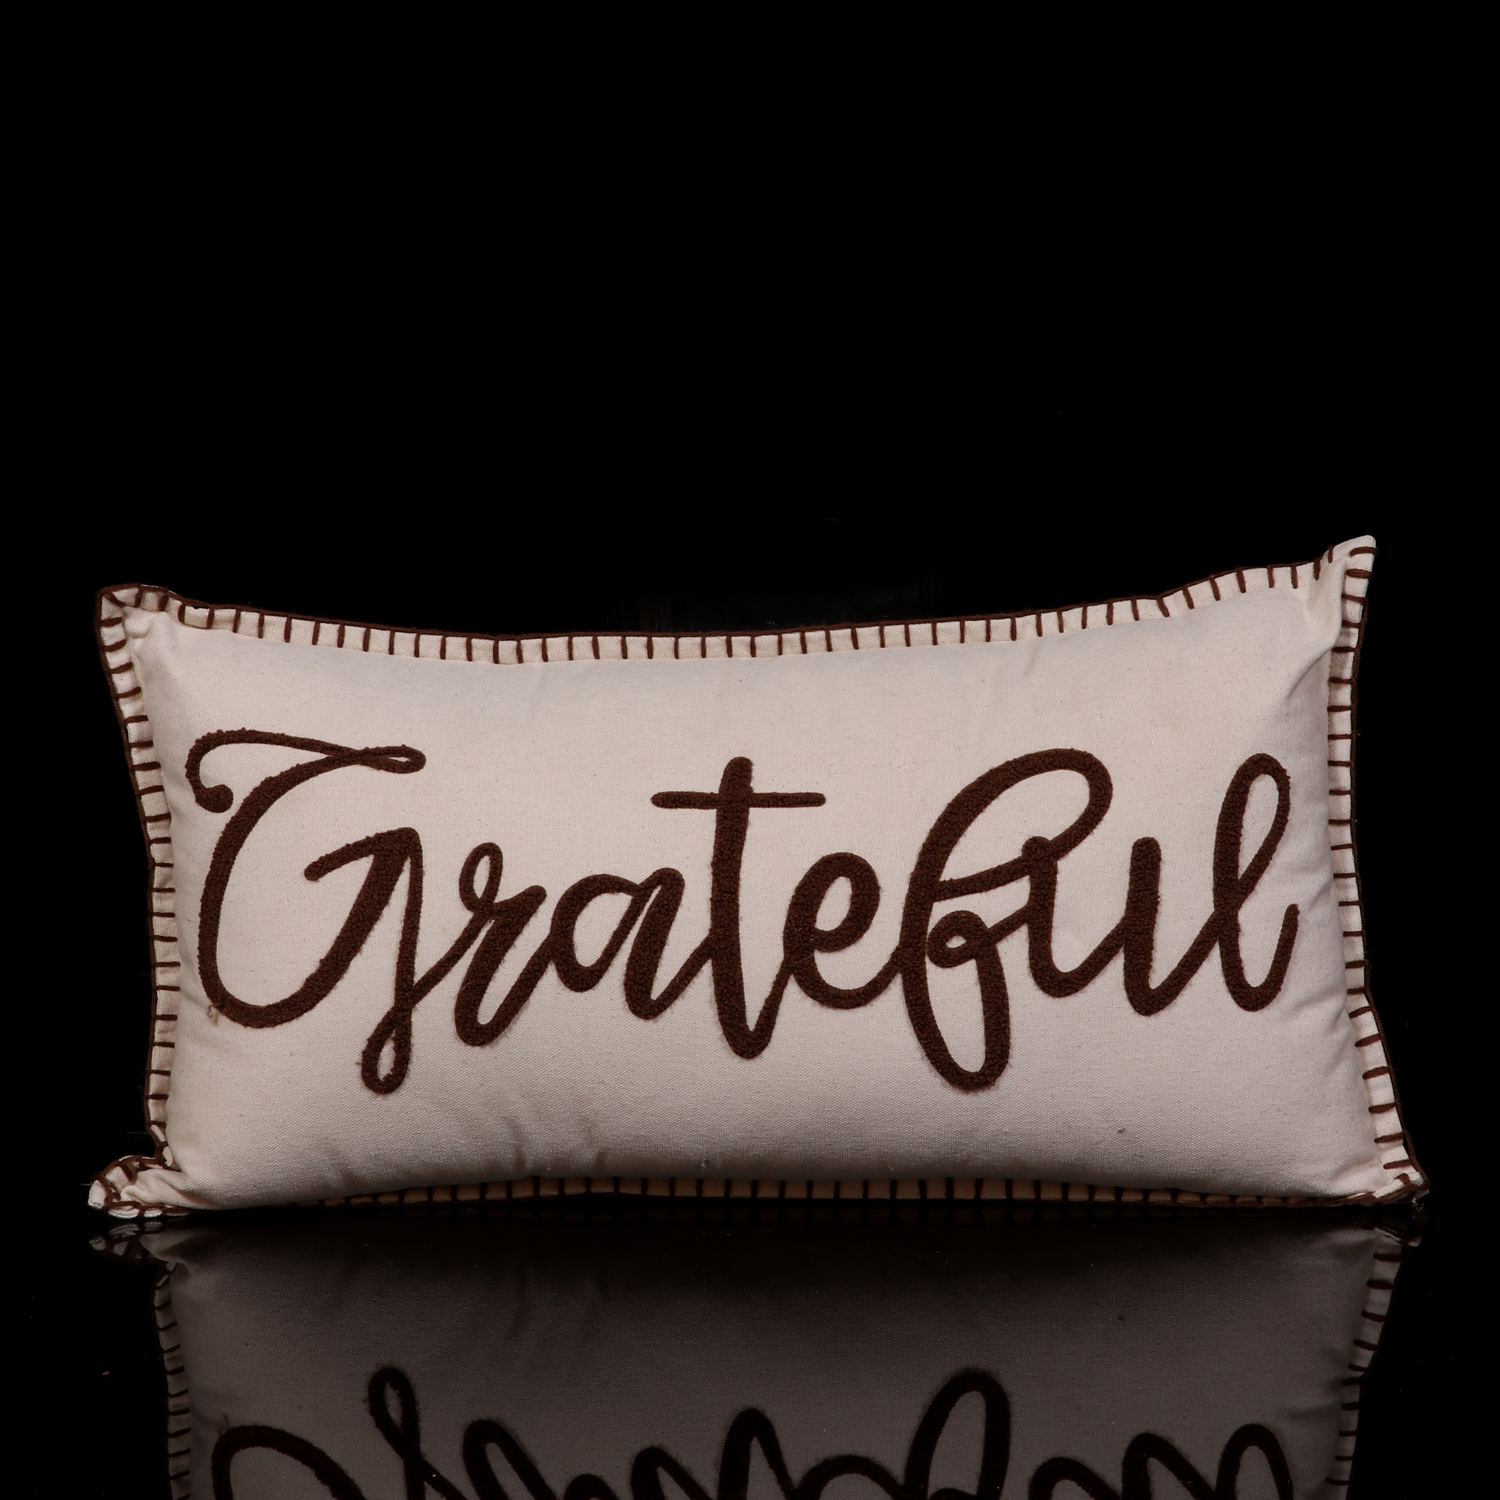 EMBROIDED GRATEFUL DESIGN LUMBAR PILLOW WITH HAMMING ON EDGES